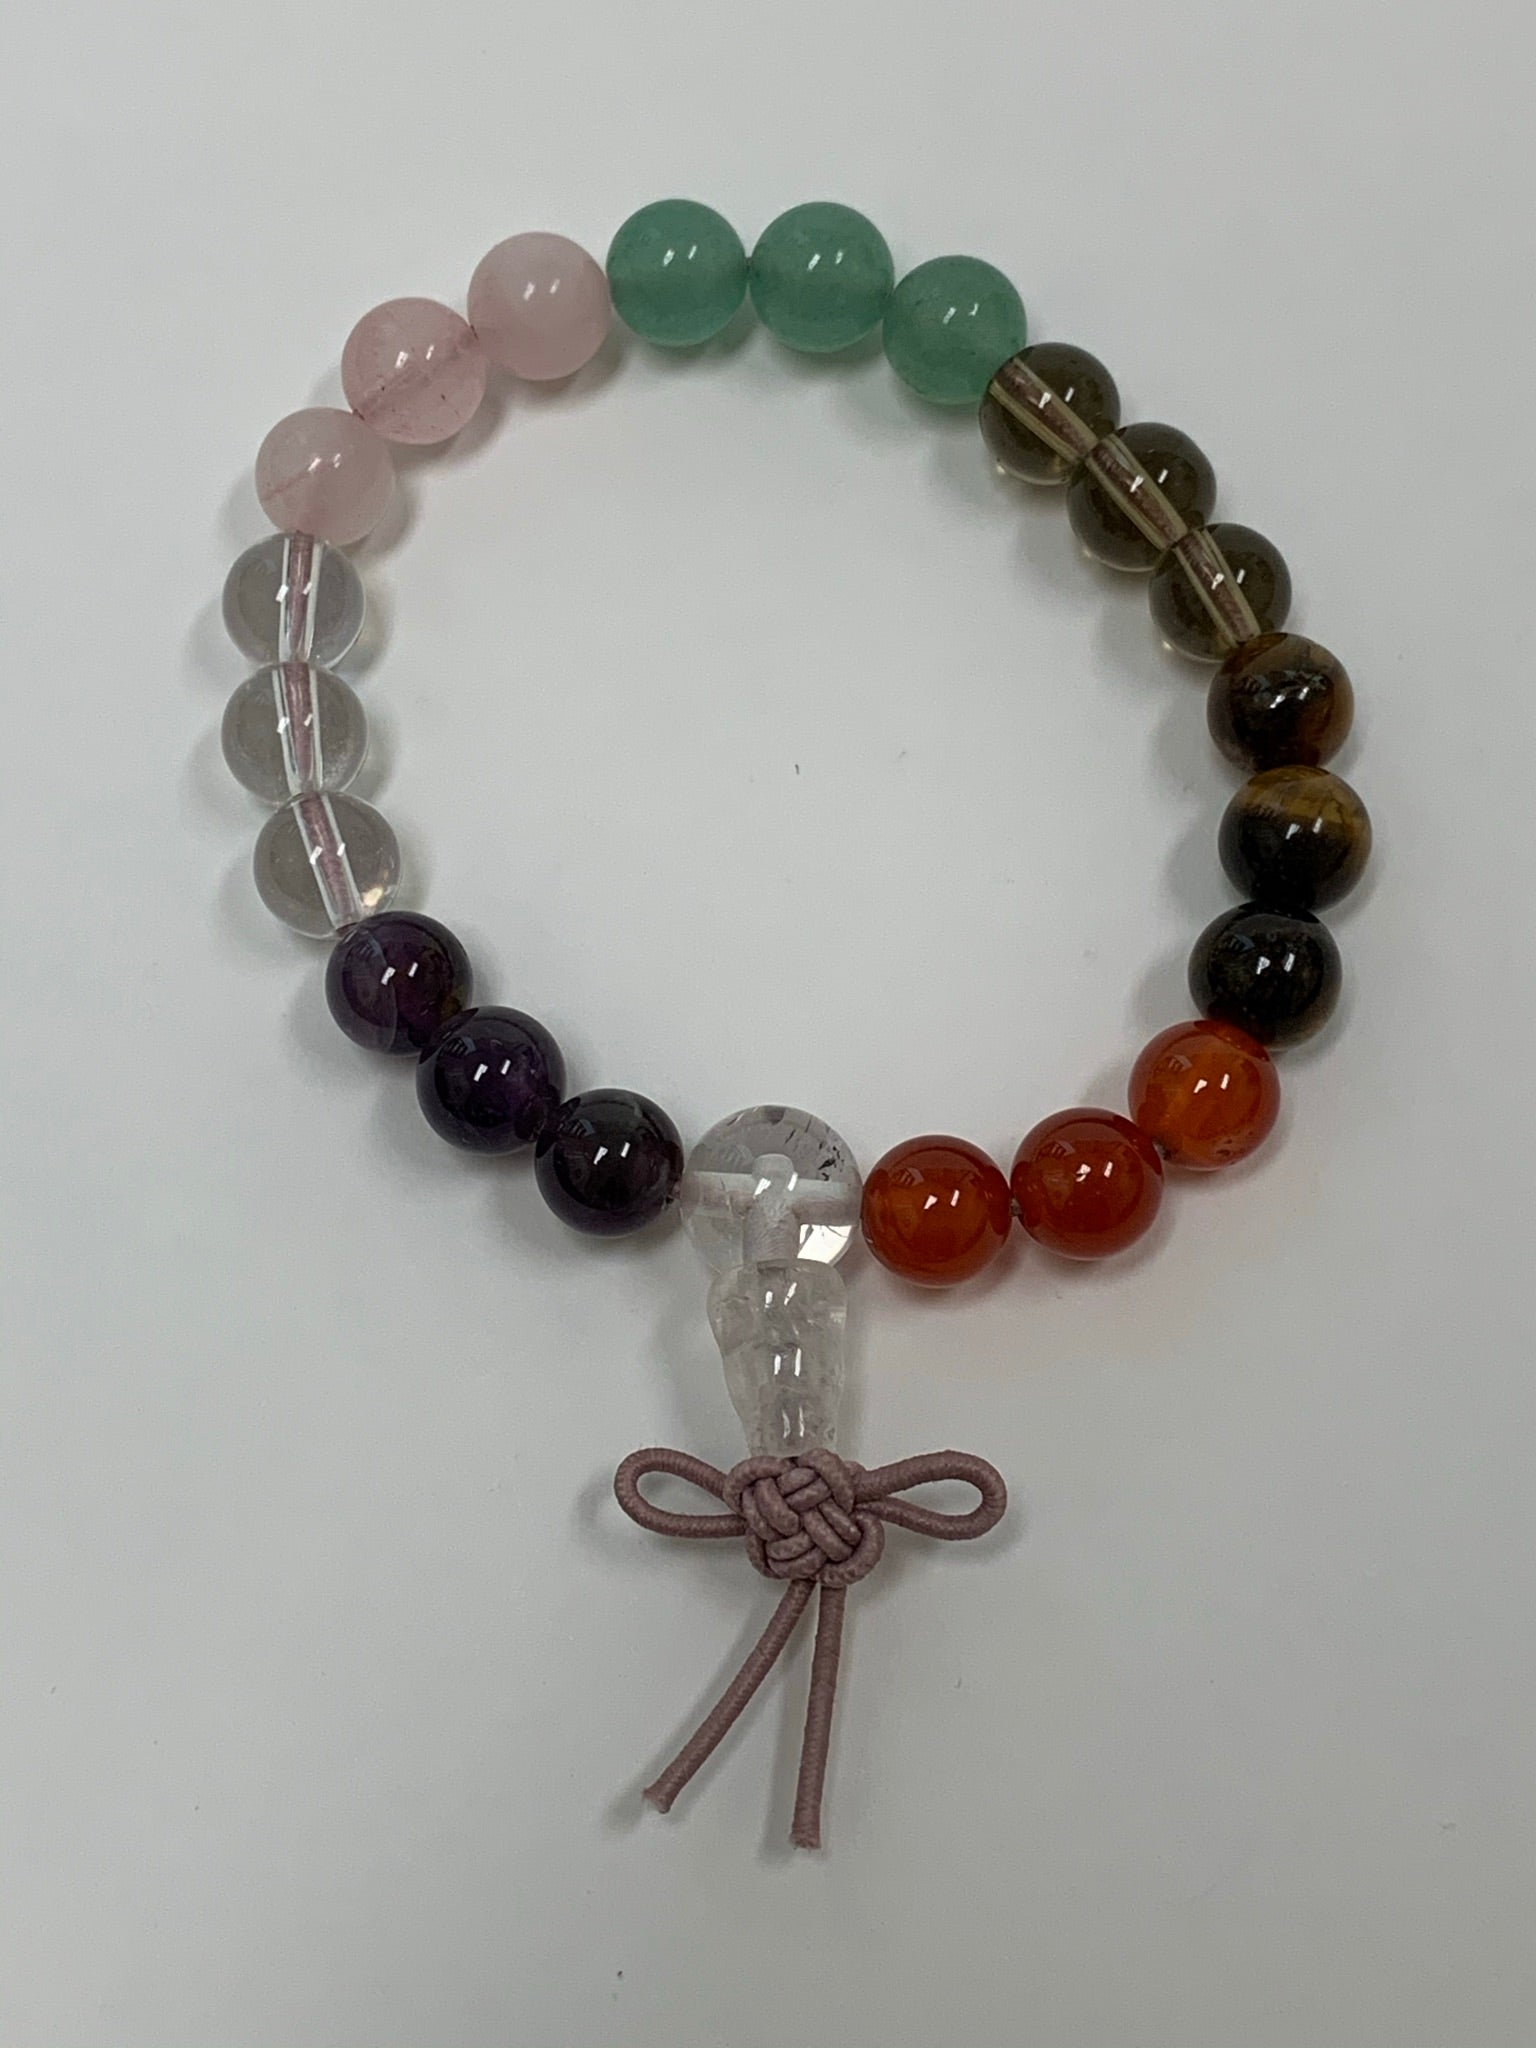 Close-up view. Mixed gemstone power bracelet with 7 different gemstones: amethyst, clear quartz, rose quartz, smoky quartz, tiger eye, carnelian, and aventurine. The bracelet is accented by a Chinese tassel knot.